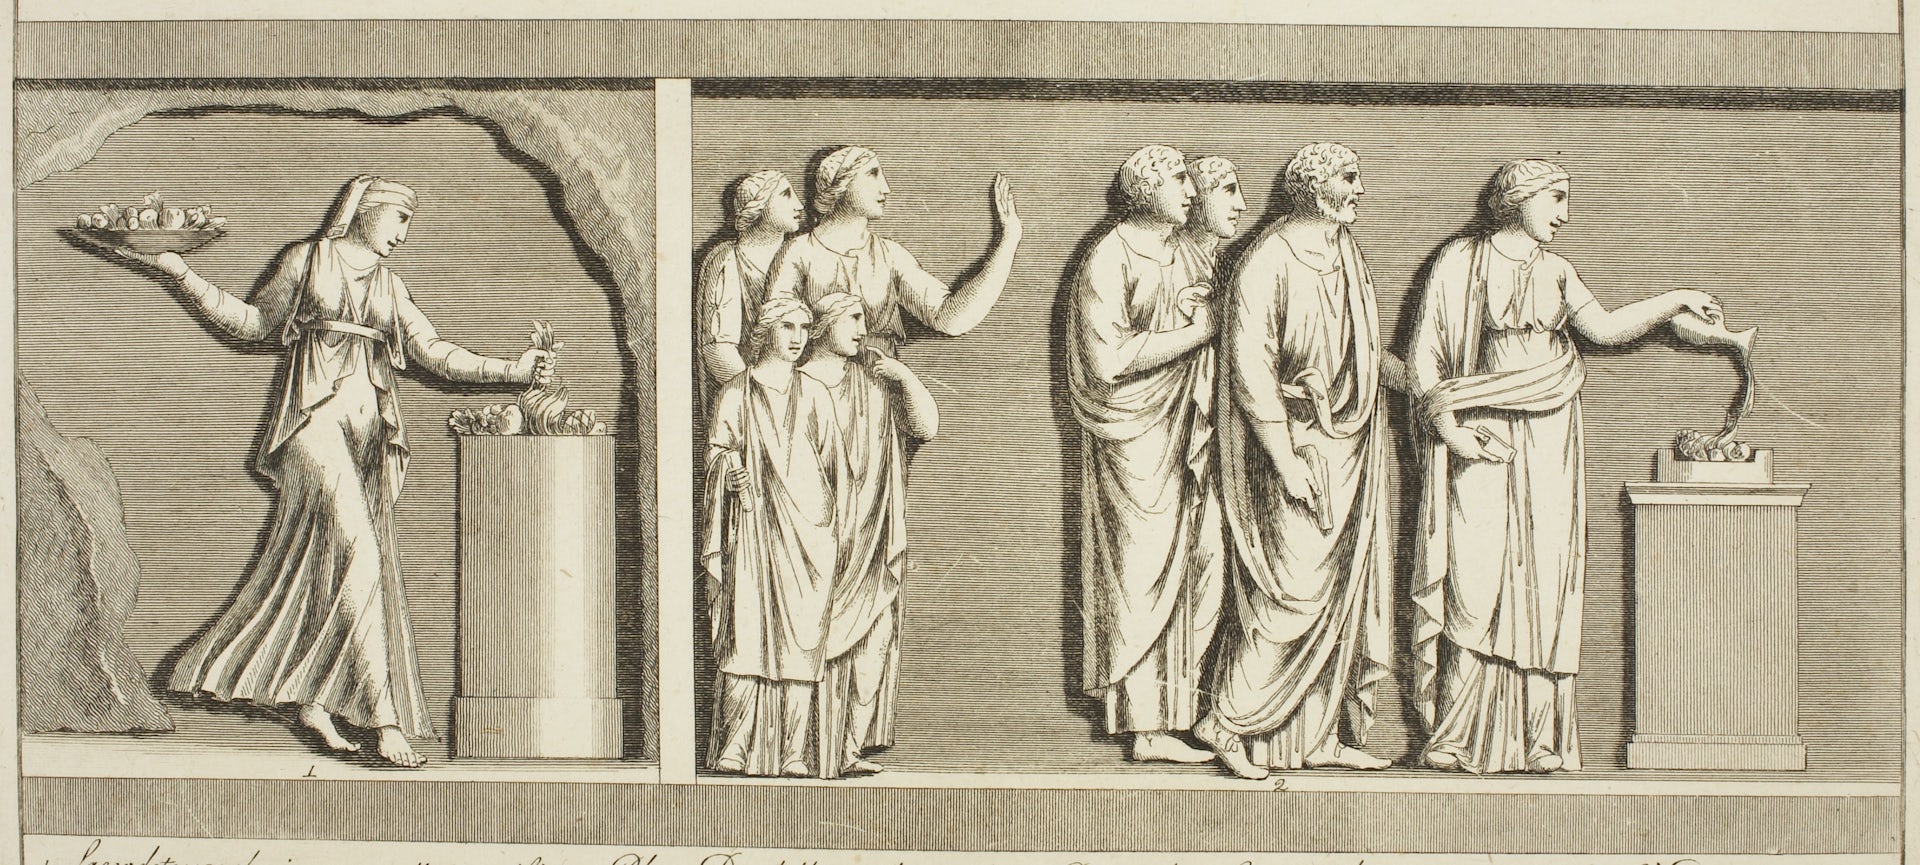 Priestess Offering to Hades Family Offering Engraving by Lorenzo Roccheggiani 1804 Thorvaldsens Museum